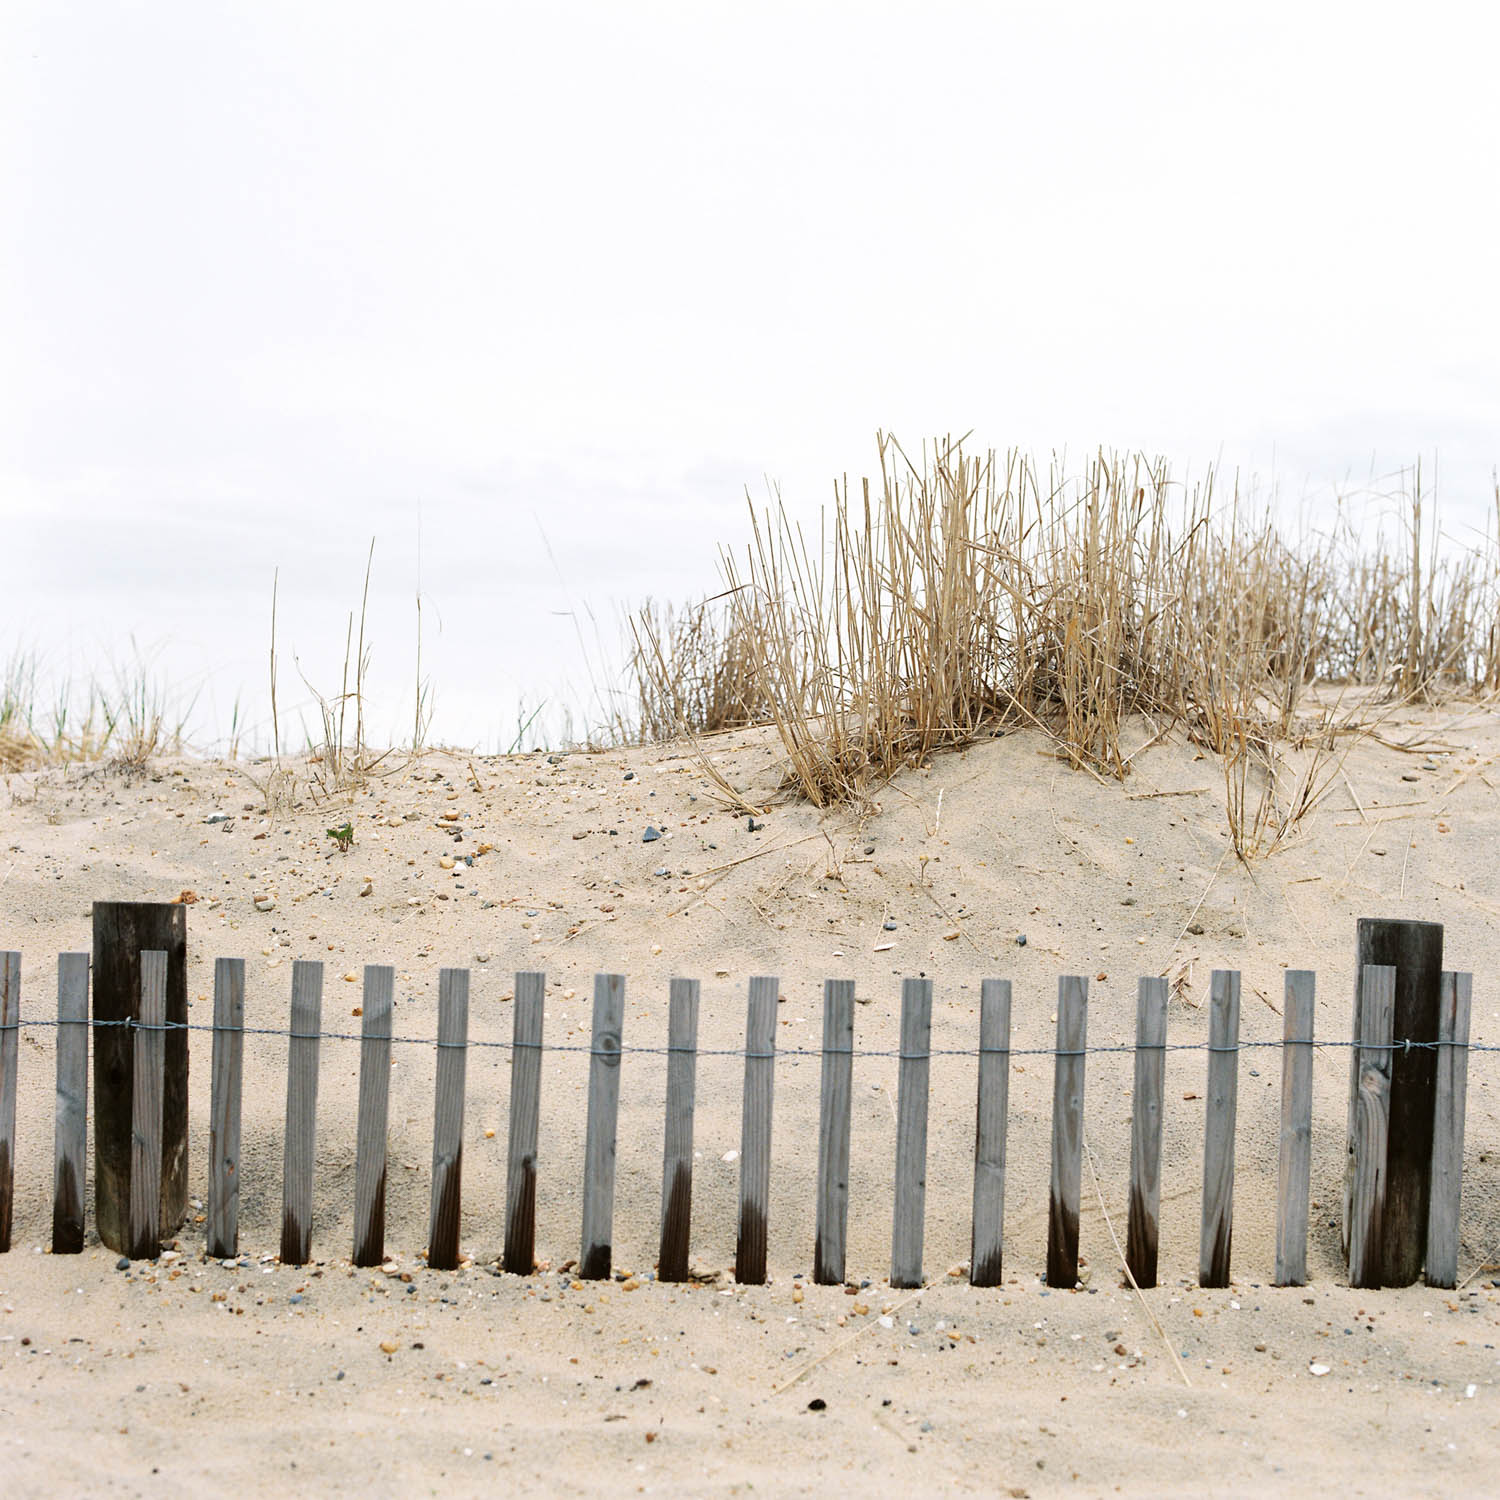 Rehoboth Beach, Delaware. Sand and wooden fence. Hasselblad 500c on Fuji Pro 400H